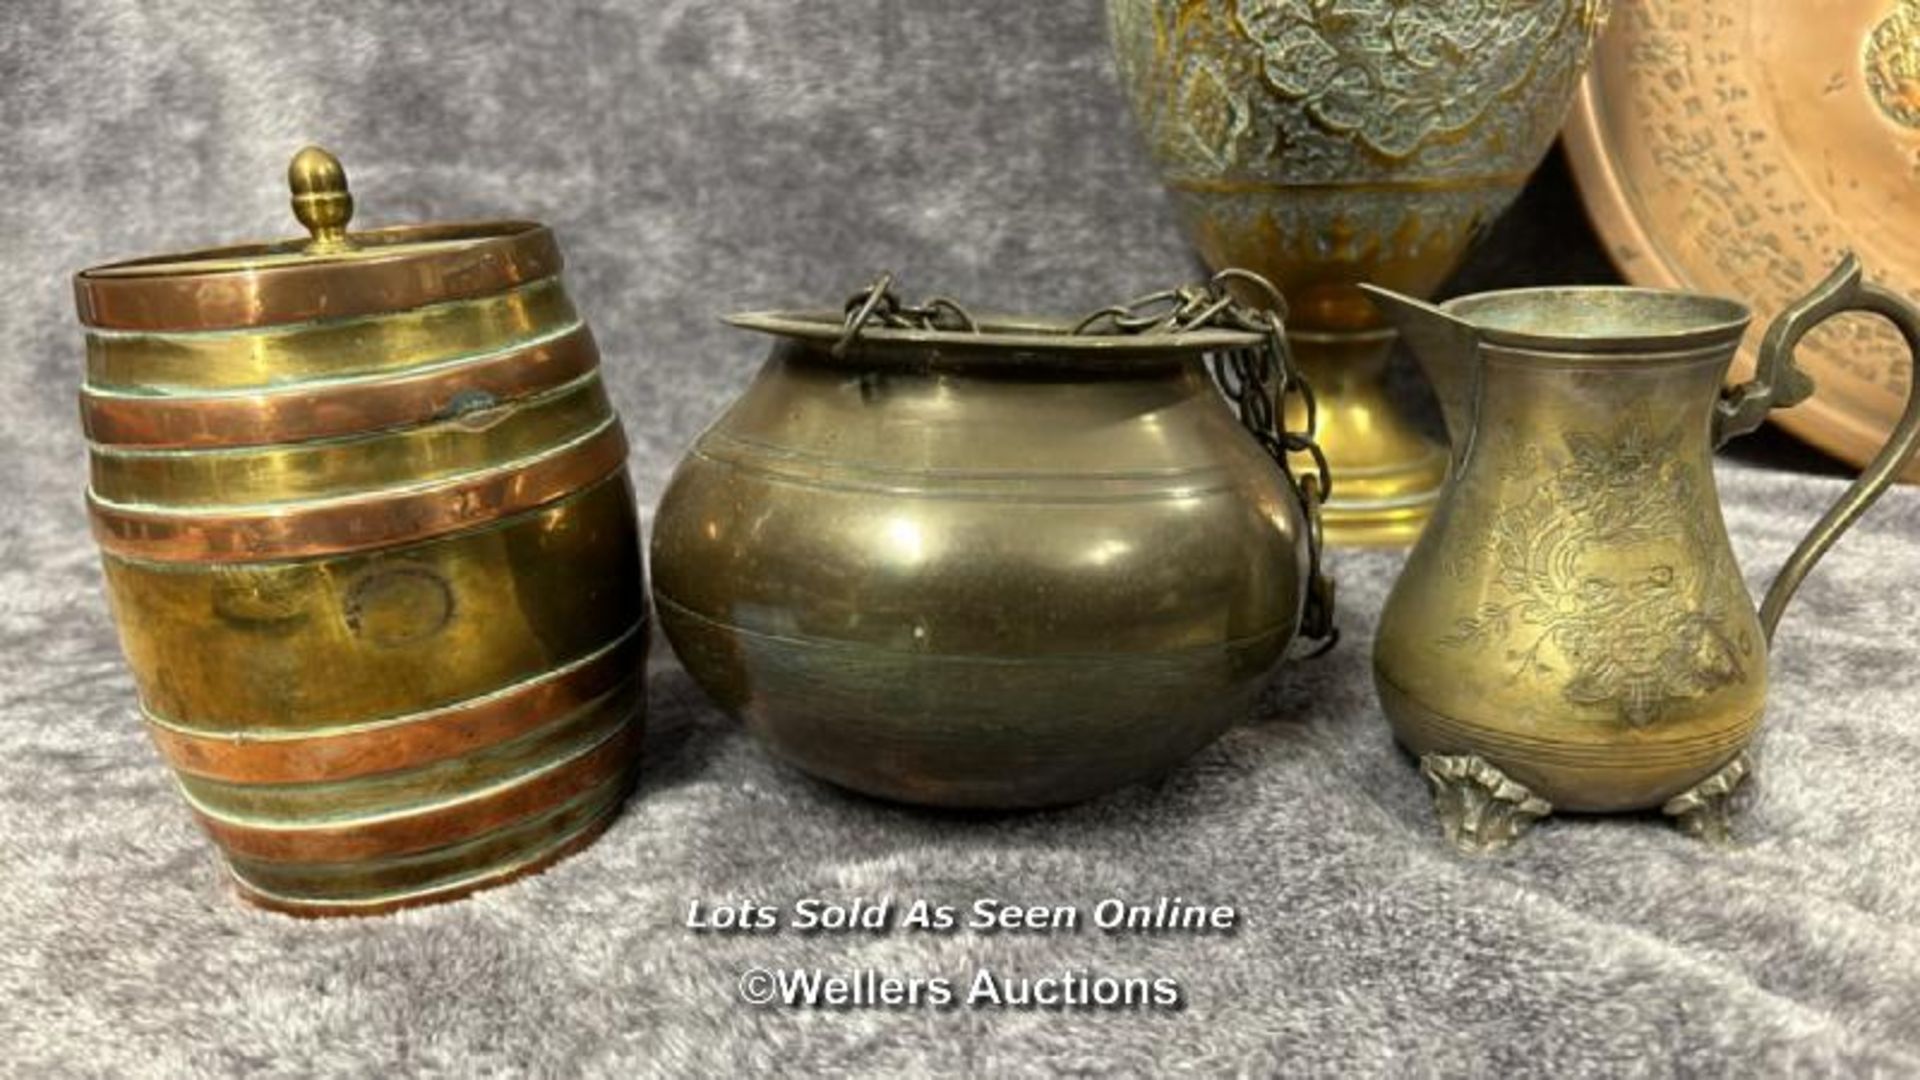 Brass ware including large vase (35cm high), pots, jugs and trays / AN14 - Image 5 of 6